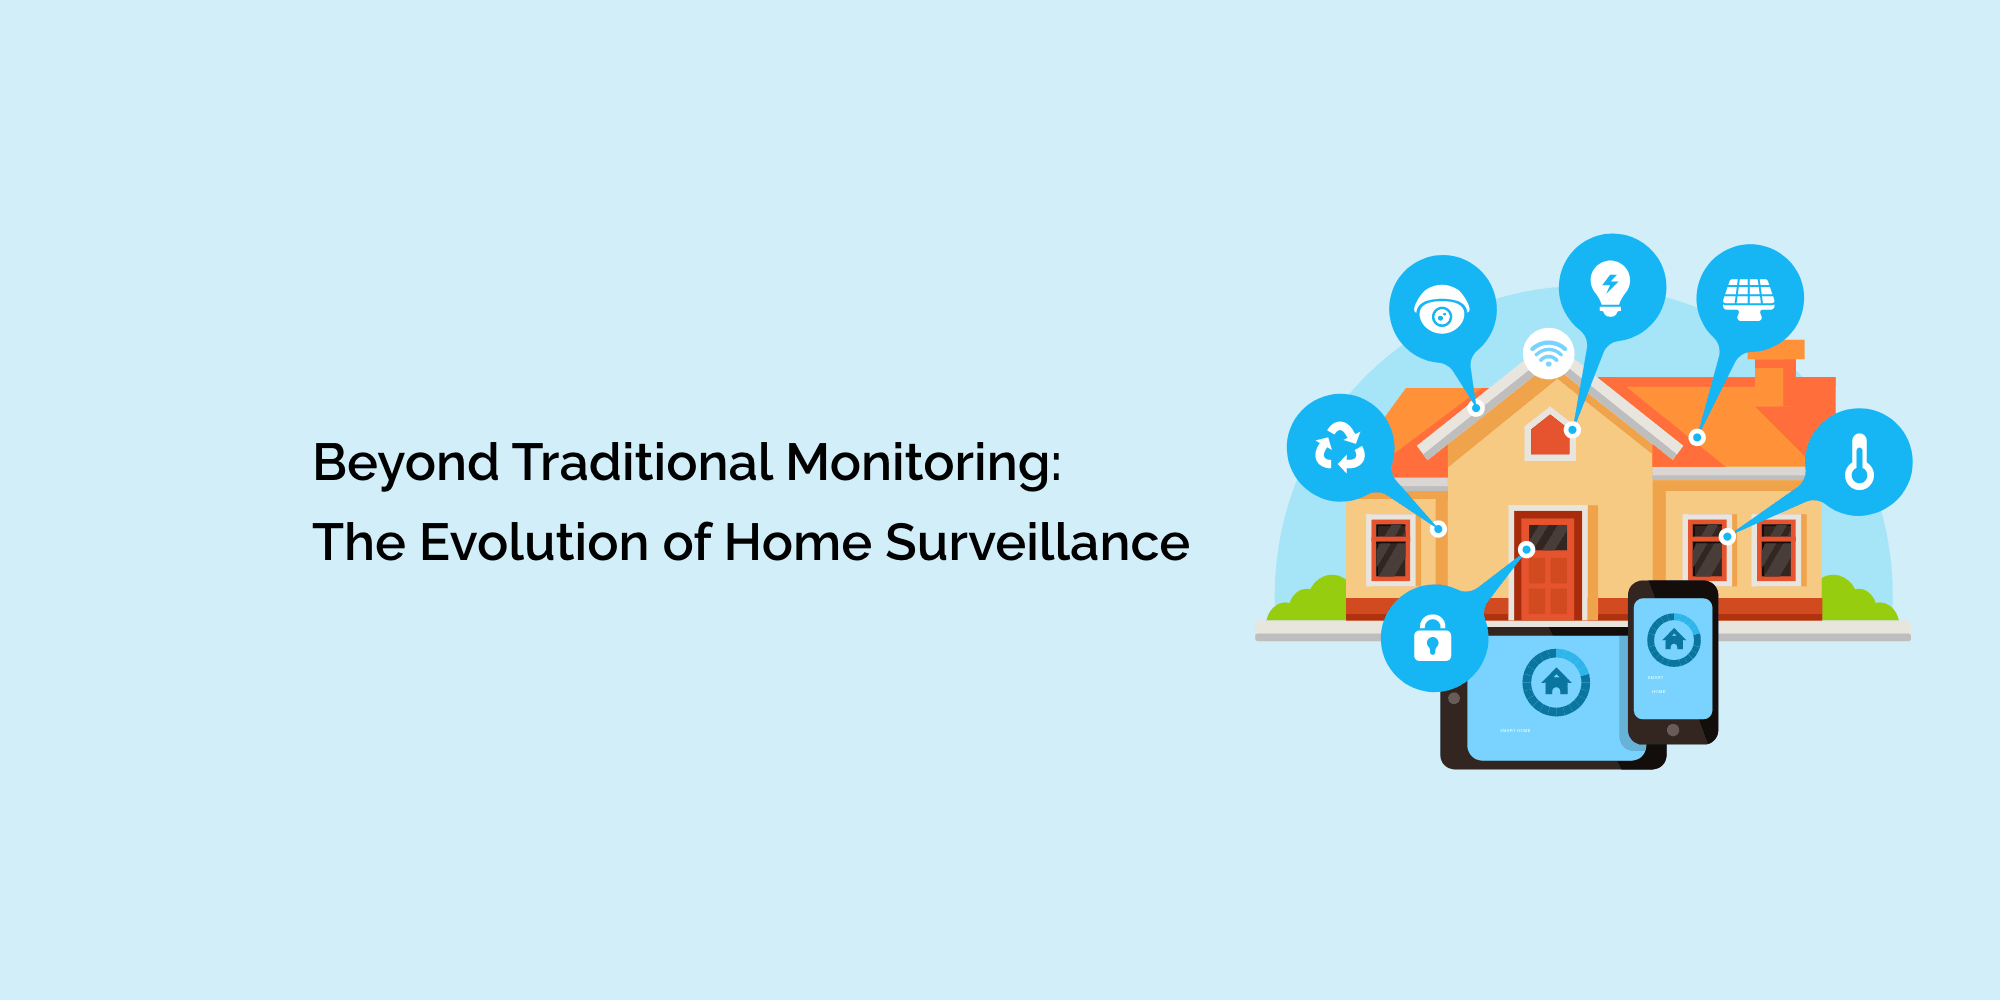 Beyond Traditional Monitoring: The Evolution of Home Surveillance